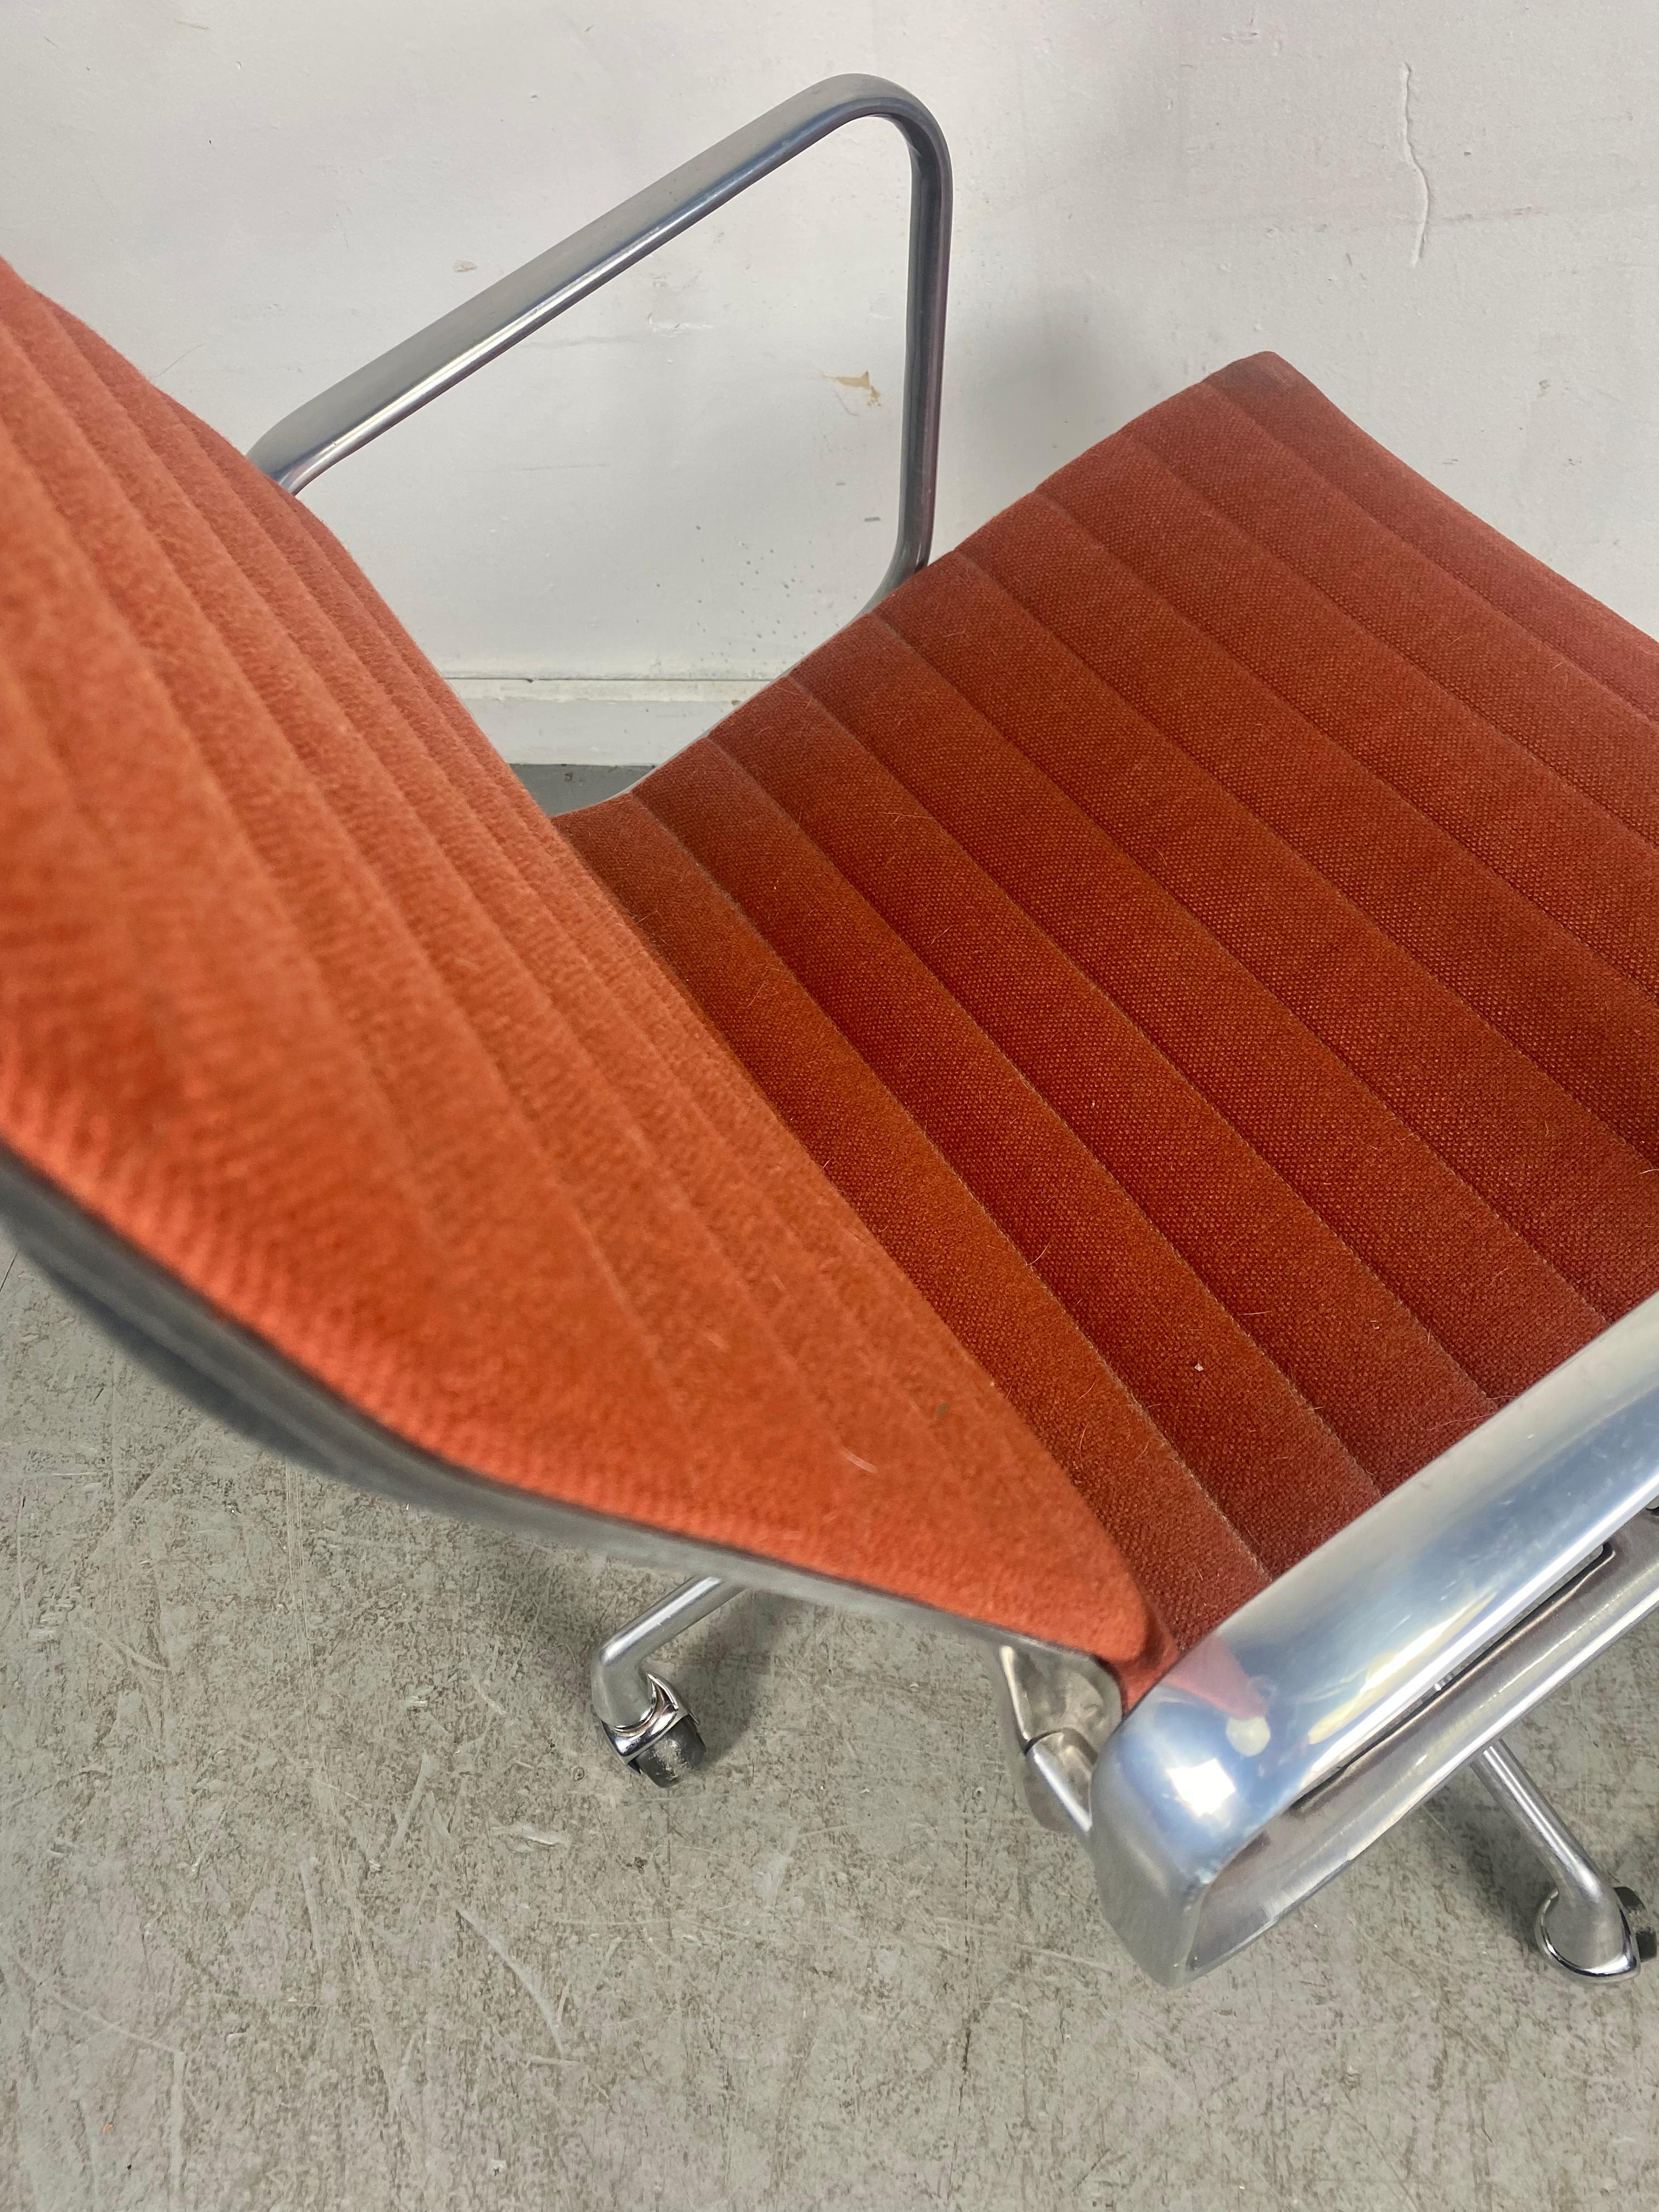 Late 20th Century Charles Eames Aluminum Group High Back Desk Chair, Herman Miller / Mid Century